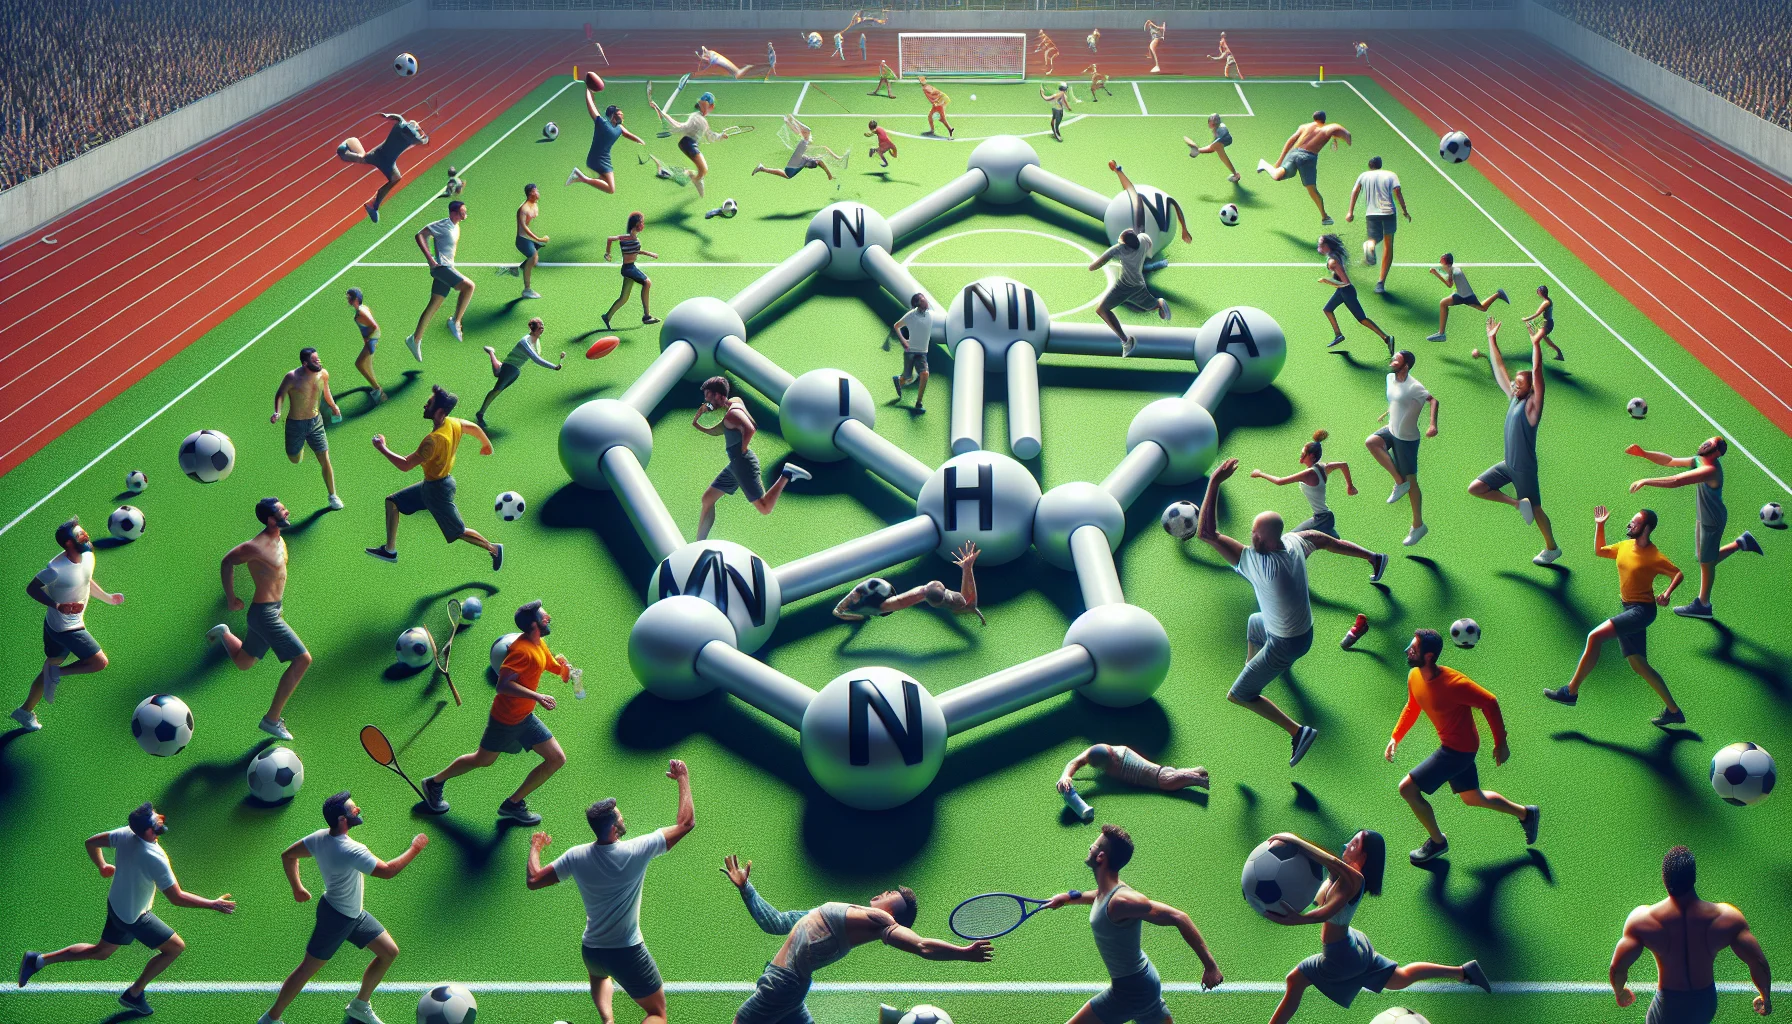 Create an amusing and realistic scene that depicts the chemical formula for magnesium nitride arranged creatively. Imagine it as a logo or a central element in a promotional poster. The surrounding scenario is full of energetic sports enthusiasts of different descents and genders. Maybe they are mid-action throwing a football, swinging a tennis racket, or performing a martial arts move. The atmosphere is vibrant, reflecting the vitality that supplements can bring. Remind to add a fine print at the bottom to promote responsible use of sports supplements.